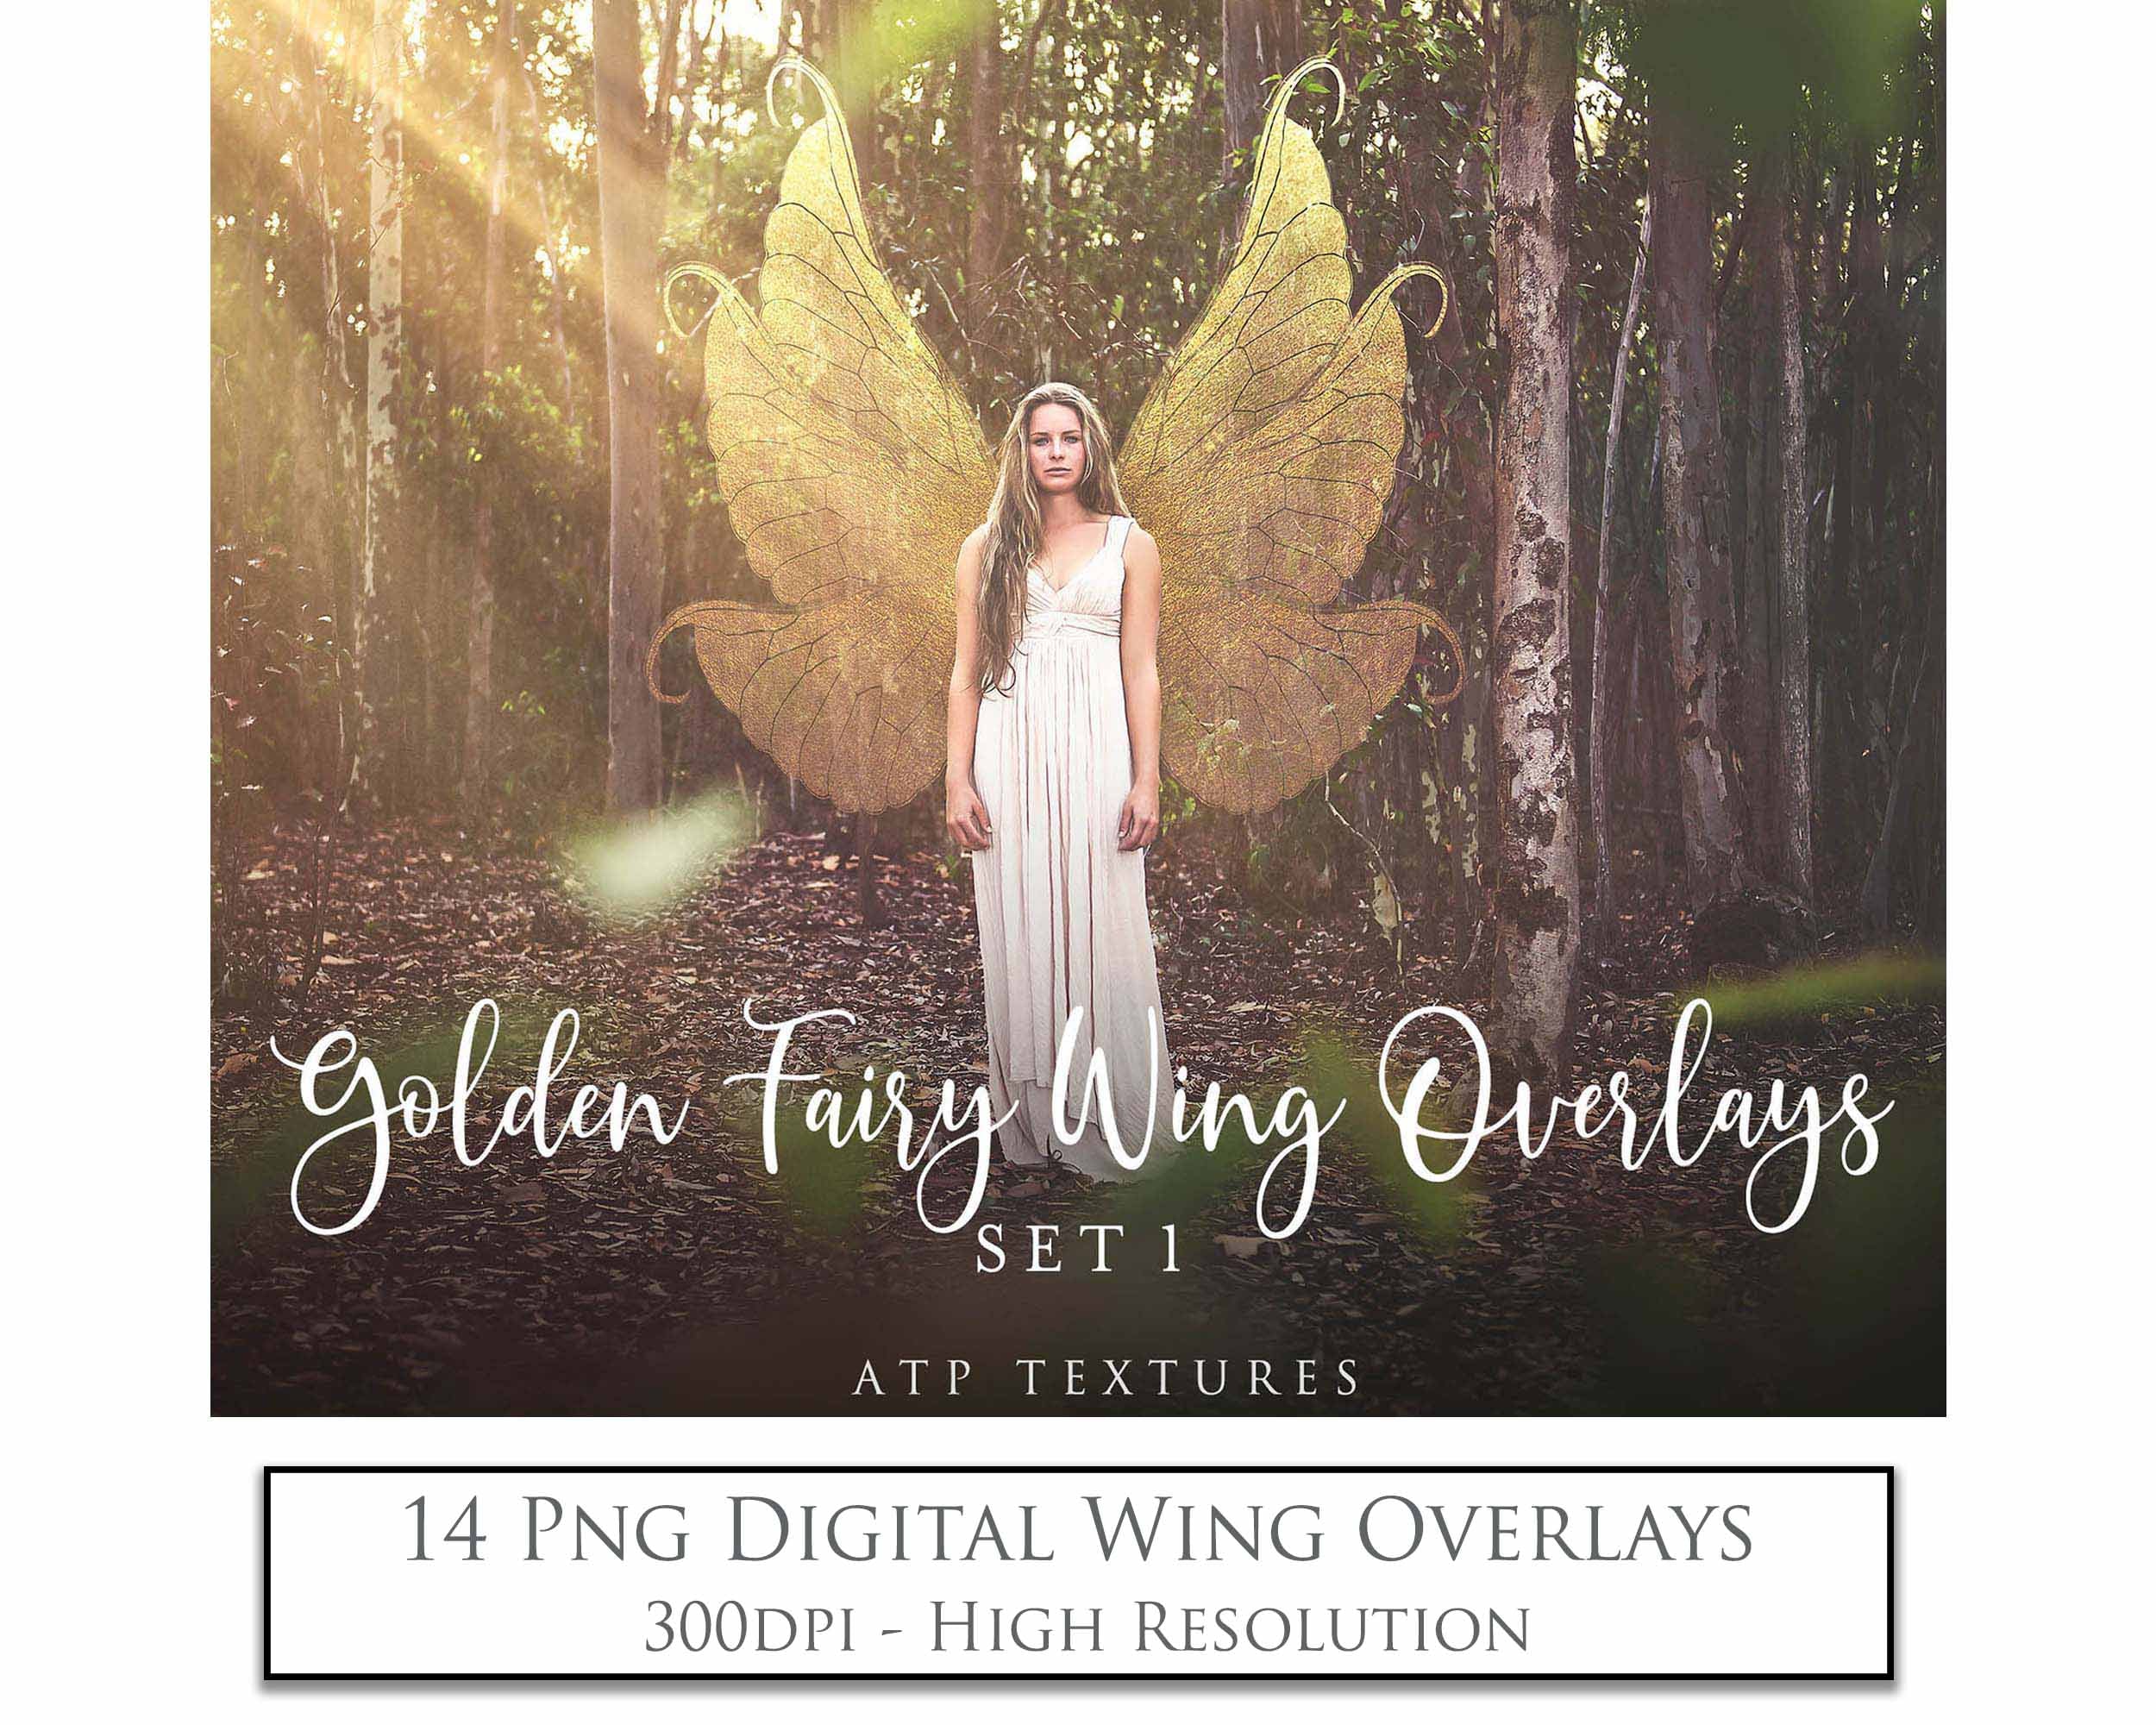 Butterfly fairy wings, Png overlays for photoshop. High resolution transparent, see through wings. Fairycore, Cosplay, Photographers, Photoshop Edits, Digital overlay for photography. Digital stock and resources. Graphic design. Colourful, Gold, Fantasy Wing Bundle. Graphic Assets for Fine Art design. By ATP Textures